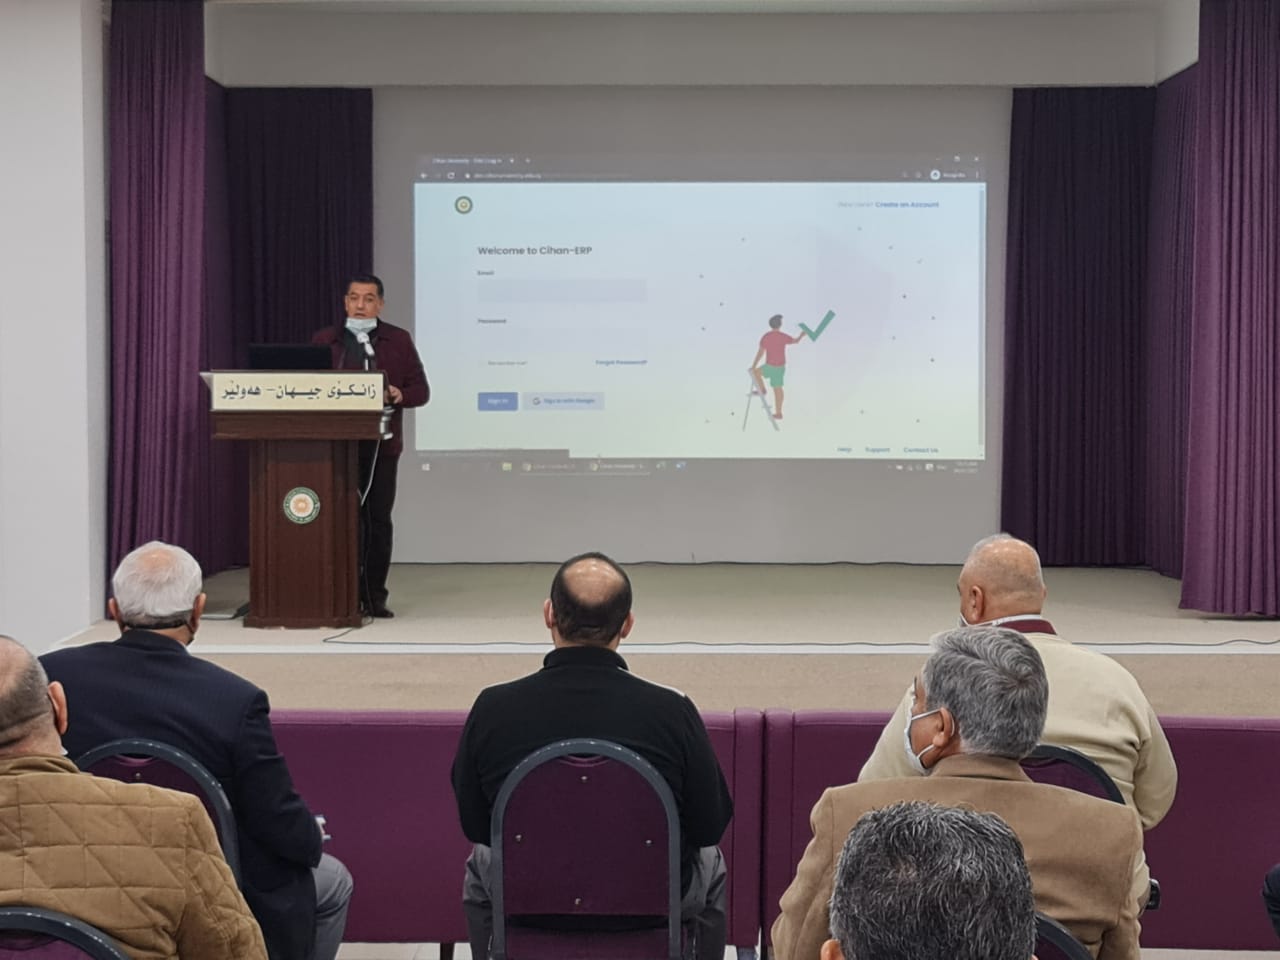 Dr. Amjad S. Al-Delawi: Cihan University has started an intensive program to electronize scientific and administrative affairs